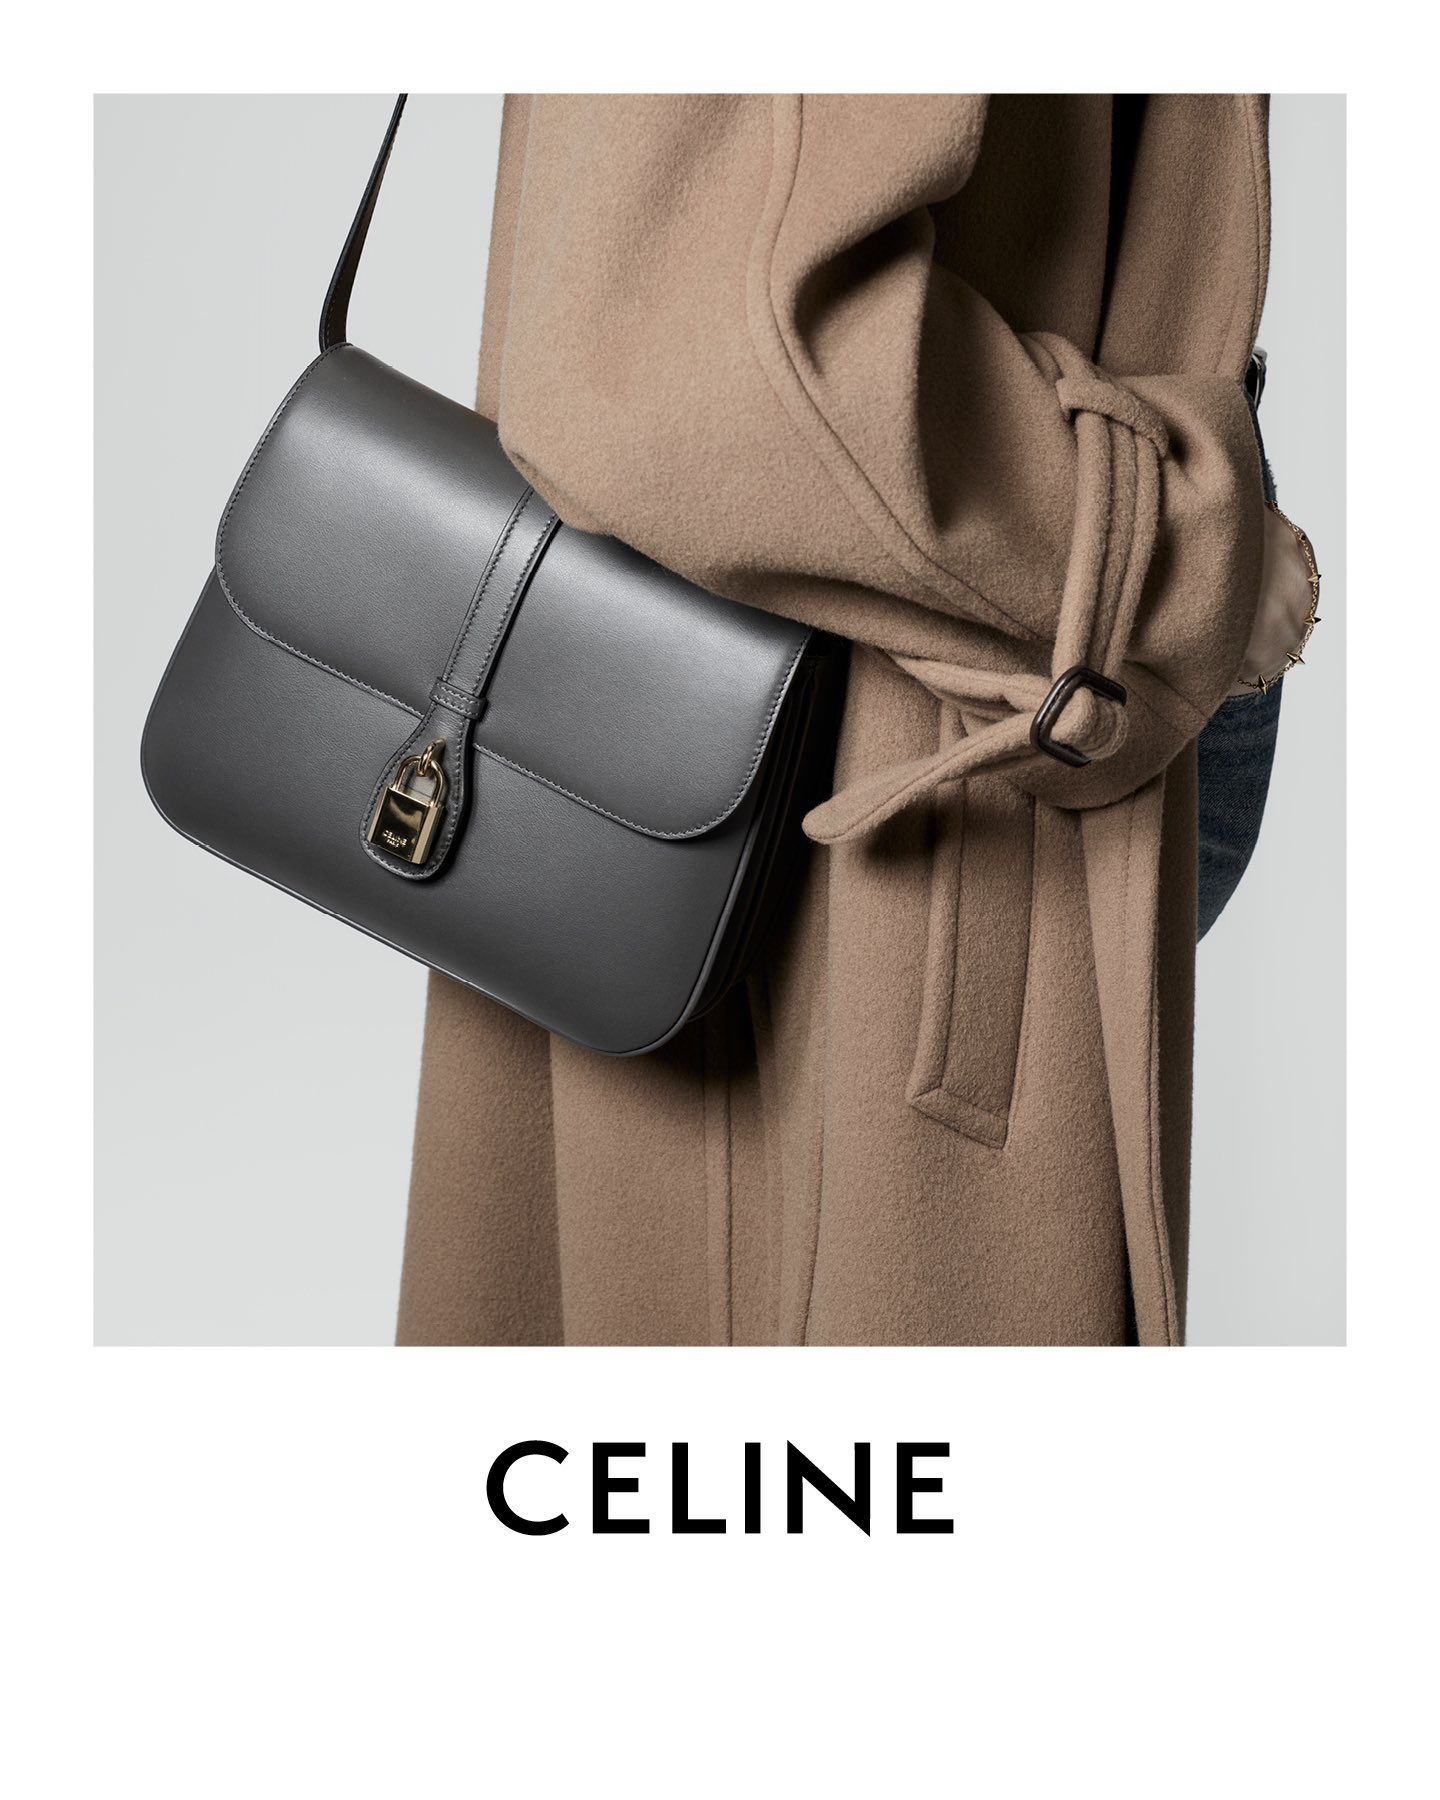 CELINE on X: CELINE WOMEN WINTER 21​ ​ TABOU STRAP CLUTCH​ INTRODUCING THE  NEW CELINE BAG​ ​ CELINE EMBROIDERED TEEN CRINO​ ​ 920 WORK HOURS​ 28  EMBROIDERERS​ 260 000 TUBE BEADS​ 46